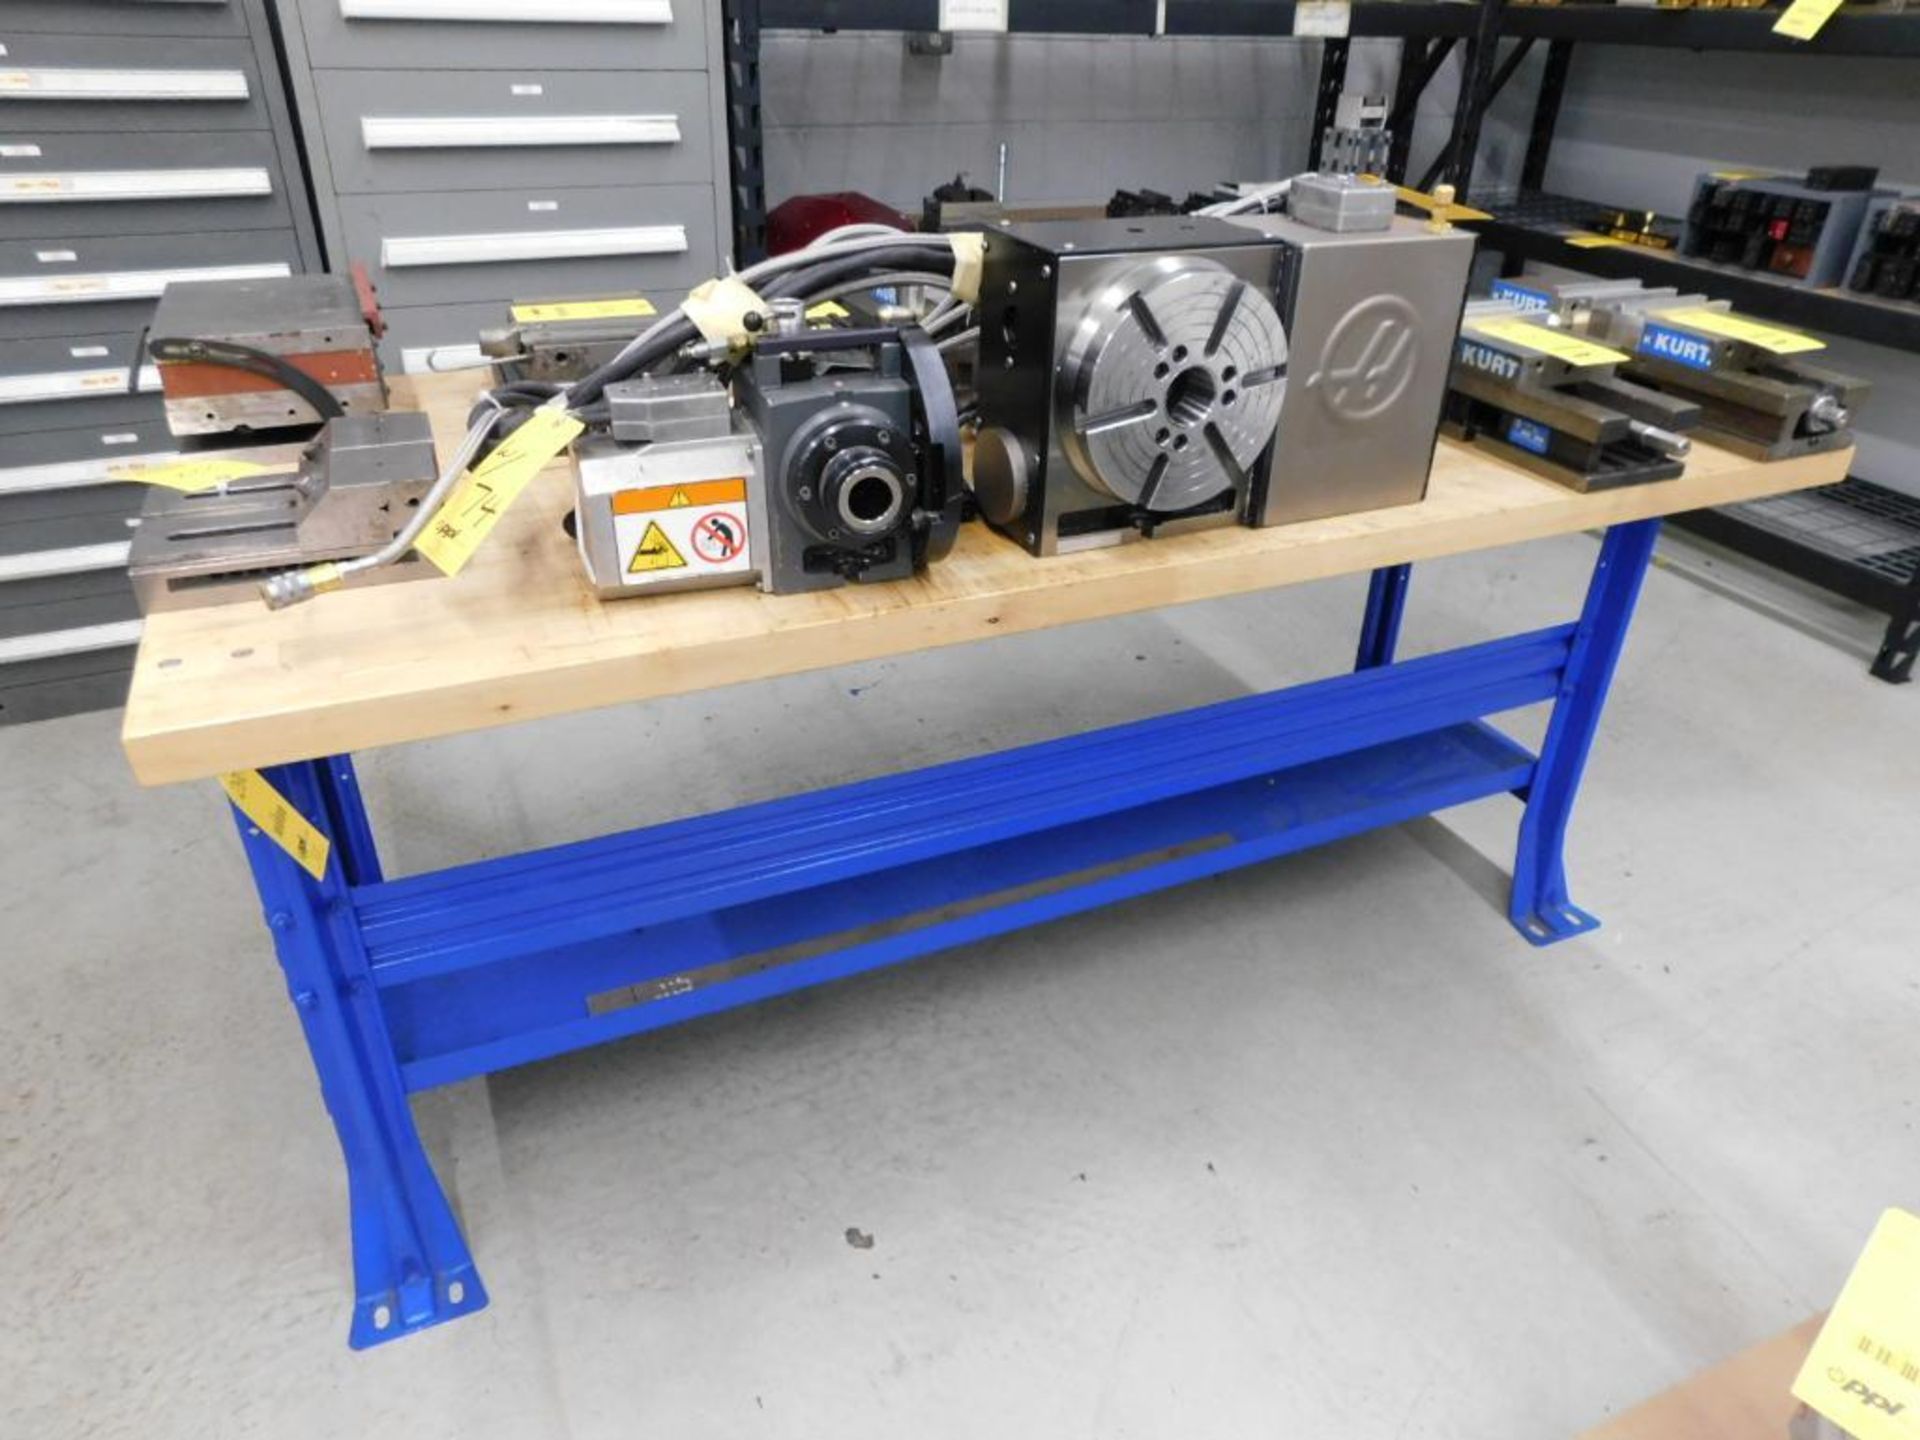 6' L x 3' W Maple Top Work Bench (DELAYED REMOVAL, CALL SITE MANAGER) - Image 2 of 2